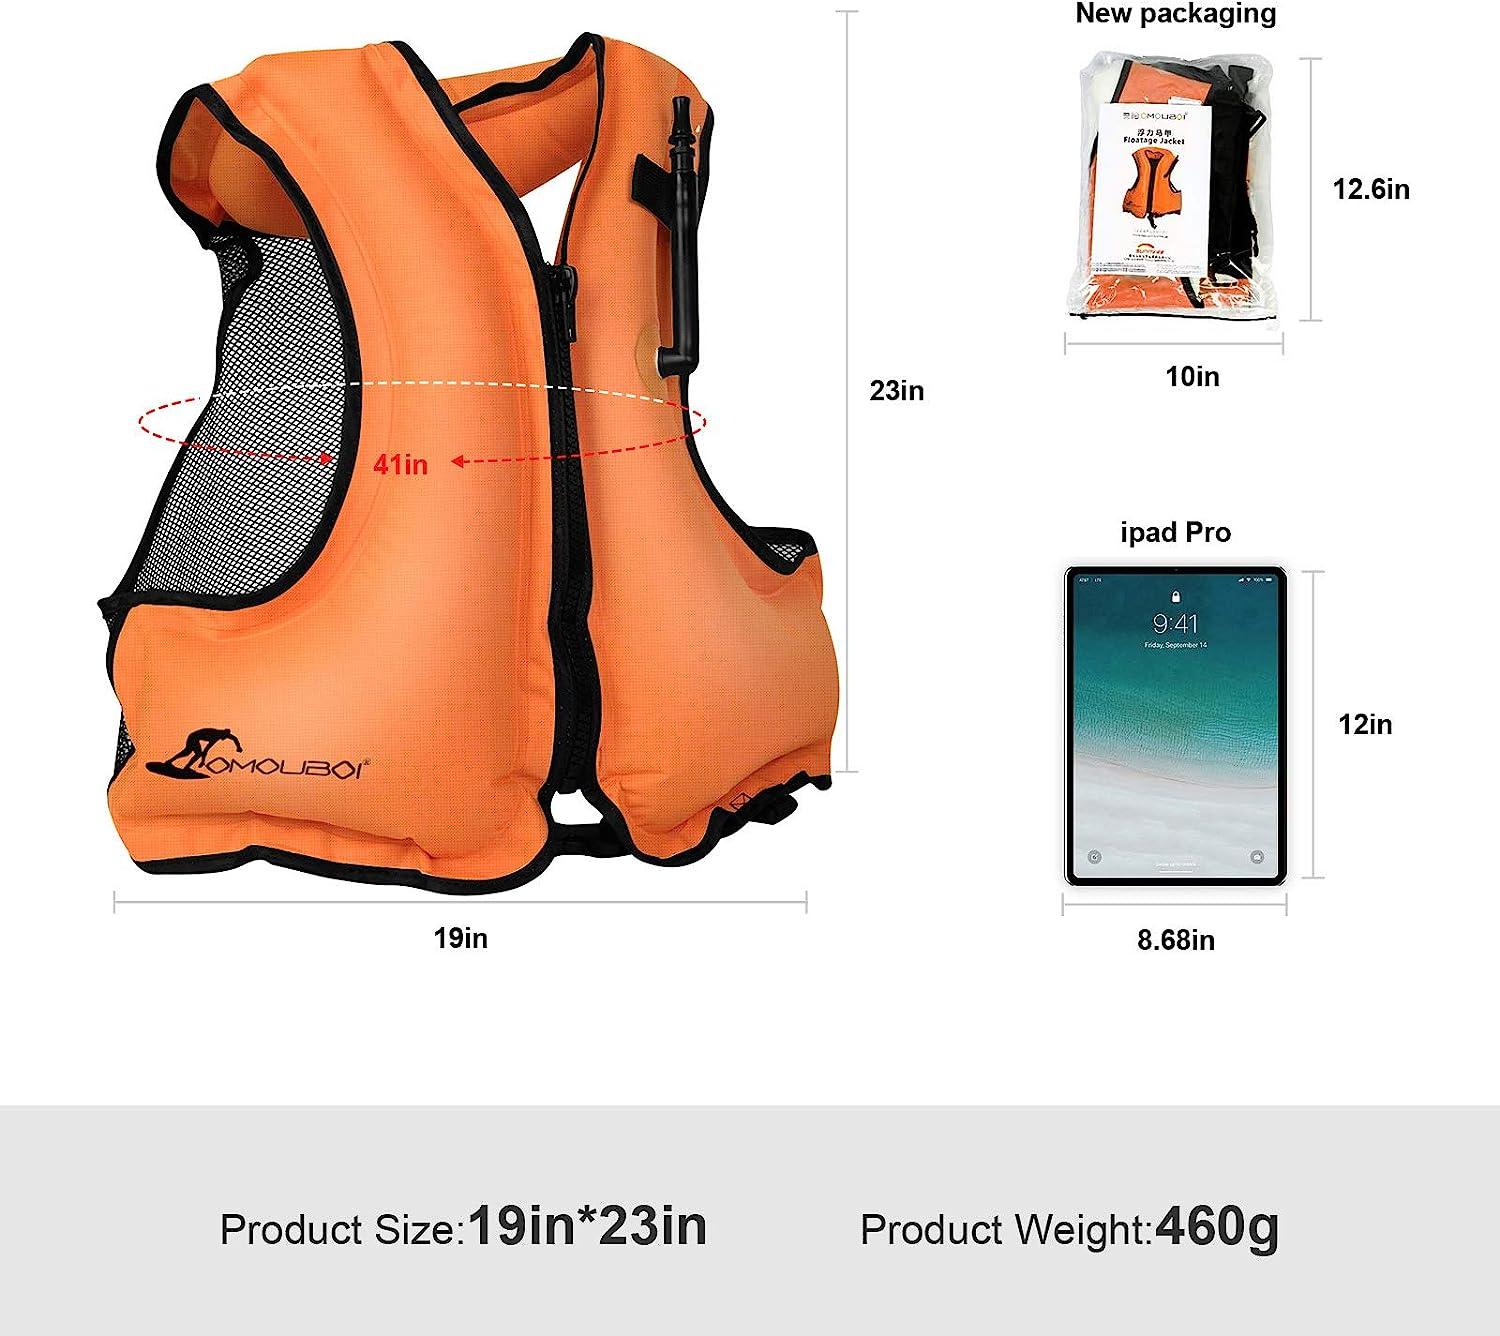 OMOUBOI Inflatable Snorkel Vest for Adult, Floatage Buoyancy Aid Swimming  Vest Lightweight Kayak Diving Jackets for Snorkeling with Leg Straps  Suitable for 90-220 lbs Outside Water Fun orange